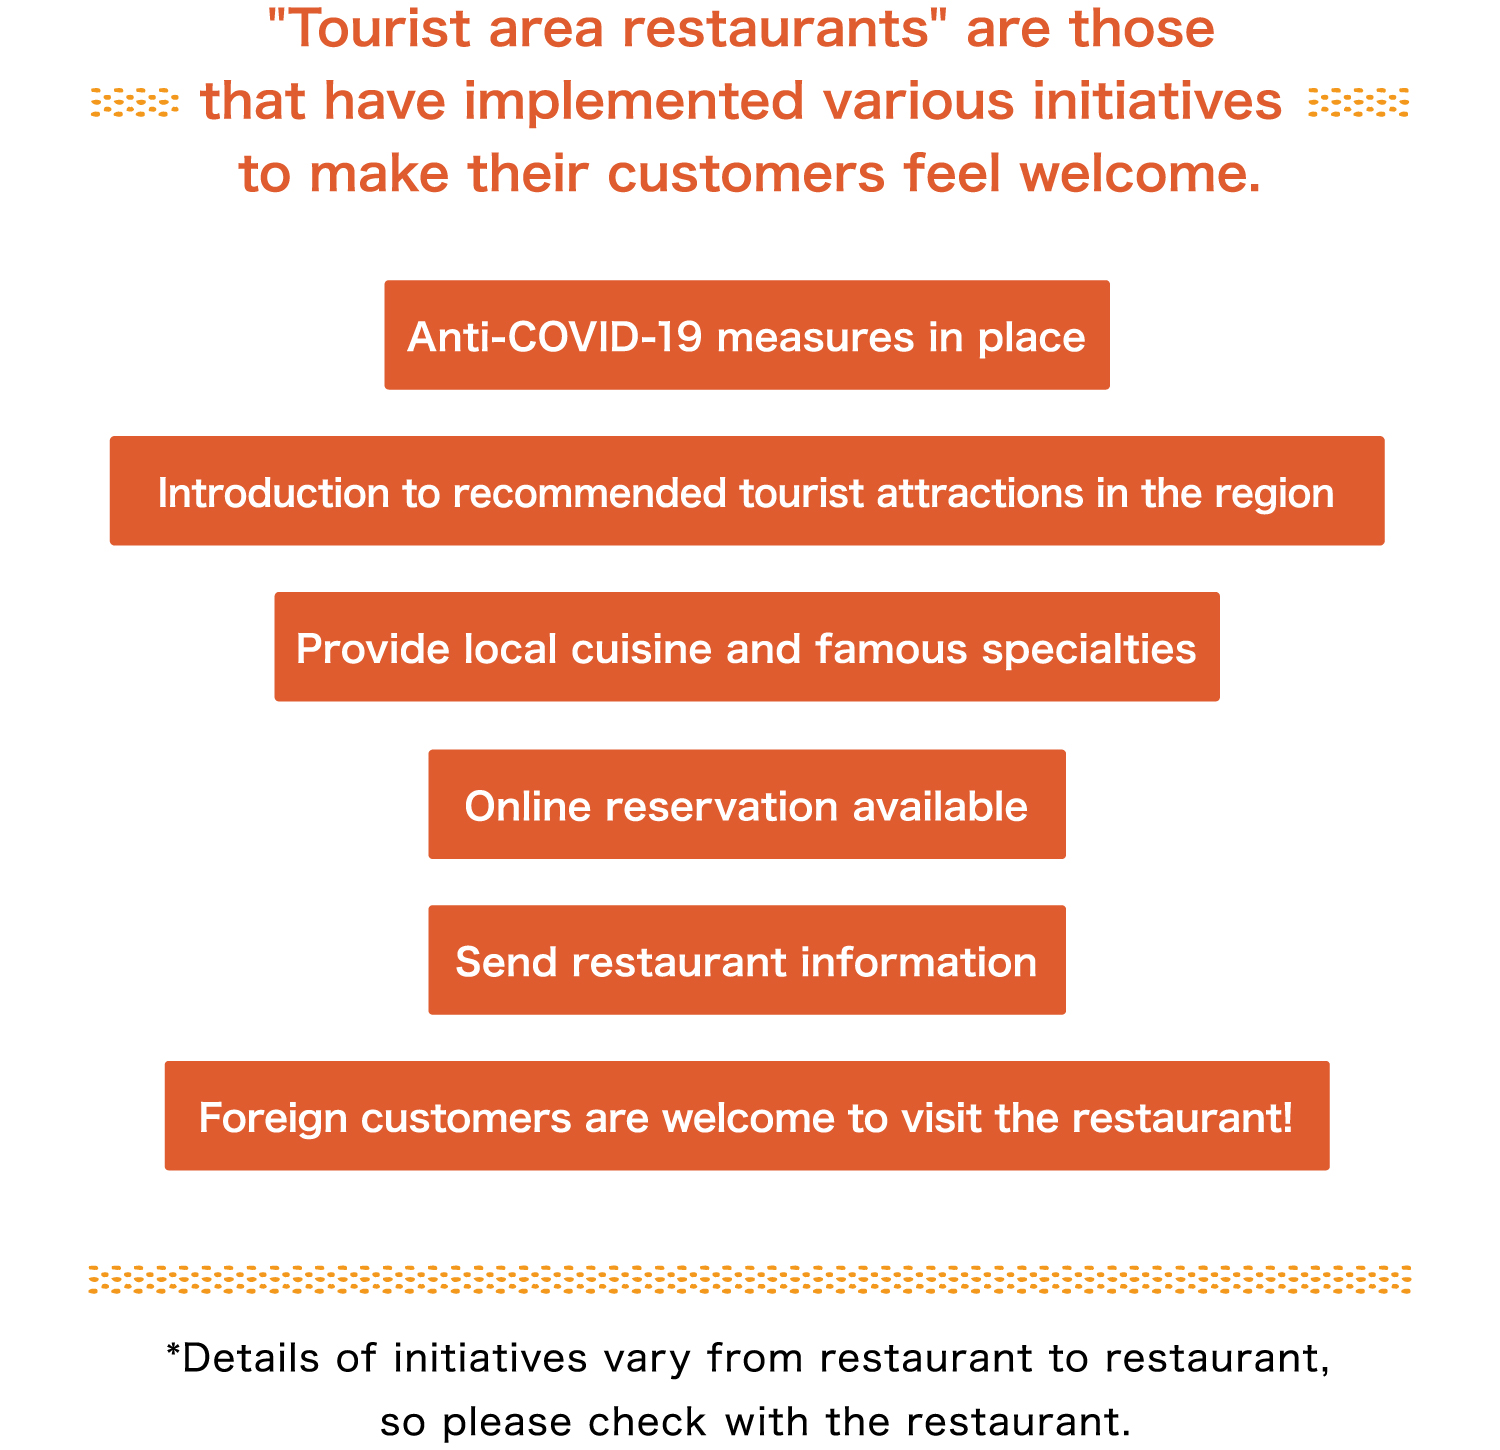 Tourist area restaurants are those that have implemented various initiatives to make their customers feel welcome.